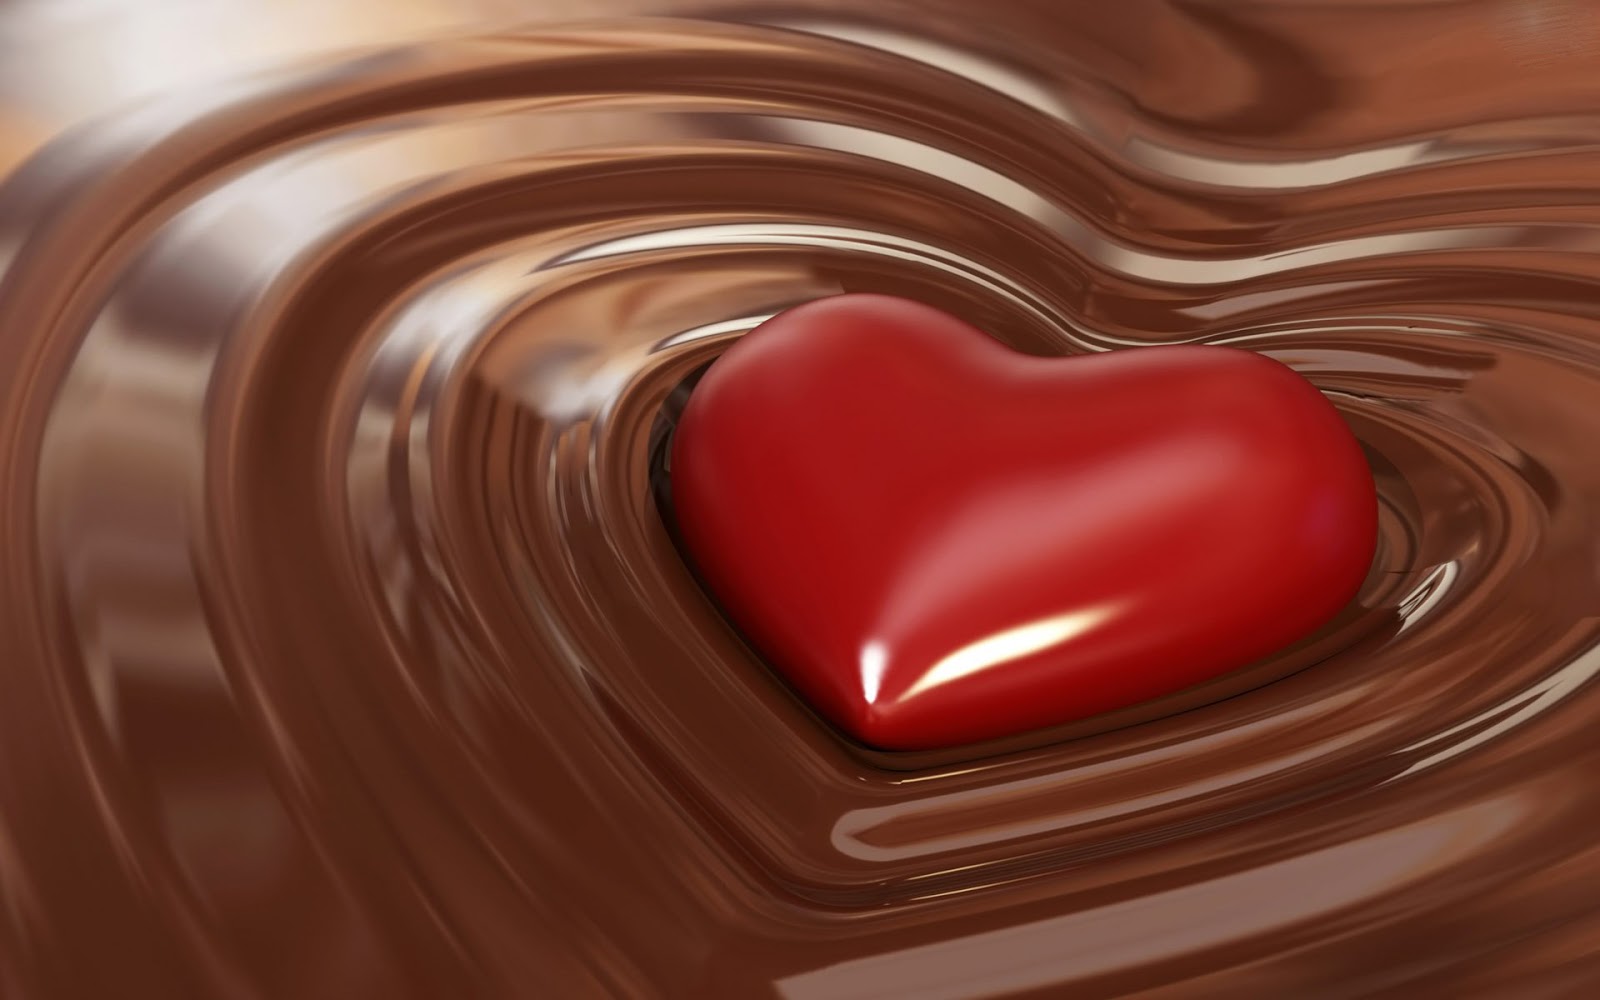 Best Chocolate Day Wallpaper in HD - Gallery